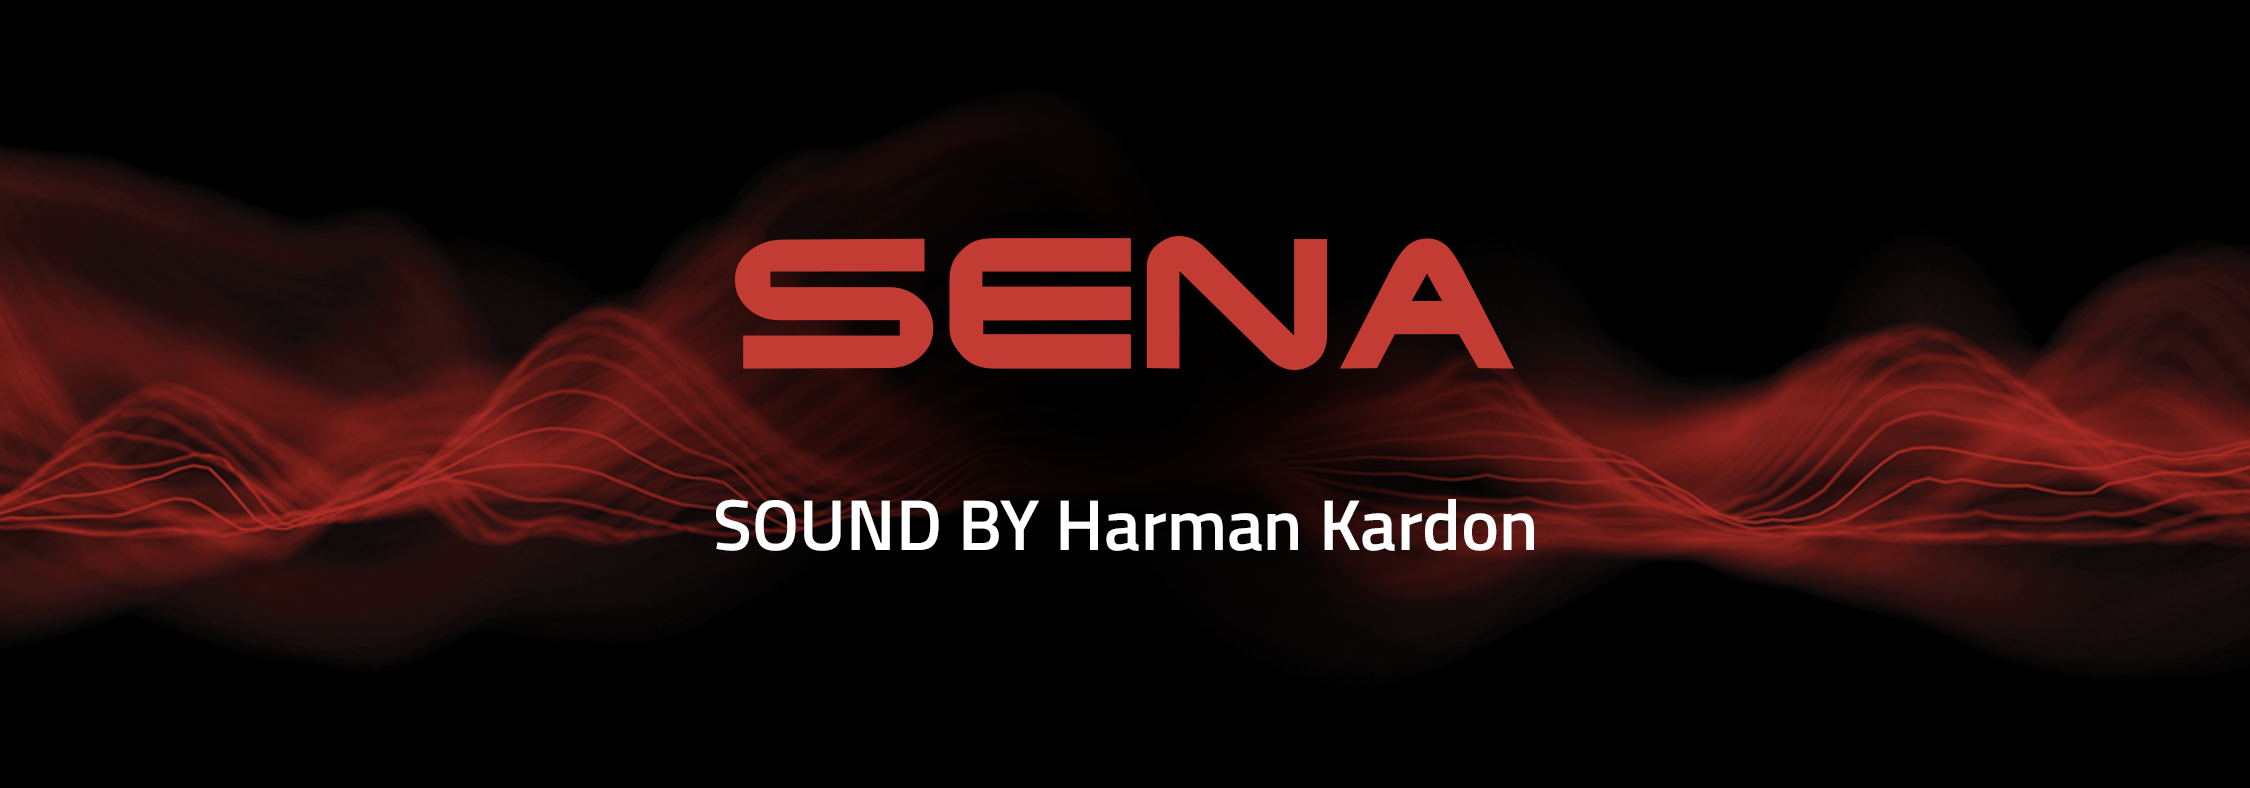 A view of the Sena logo, against a matching backscape